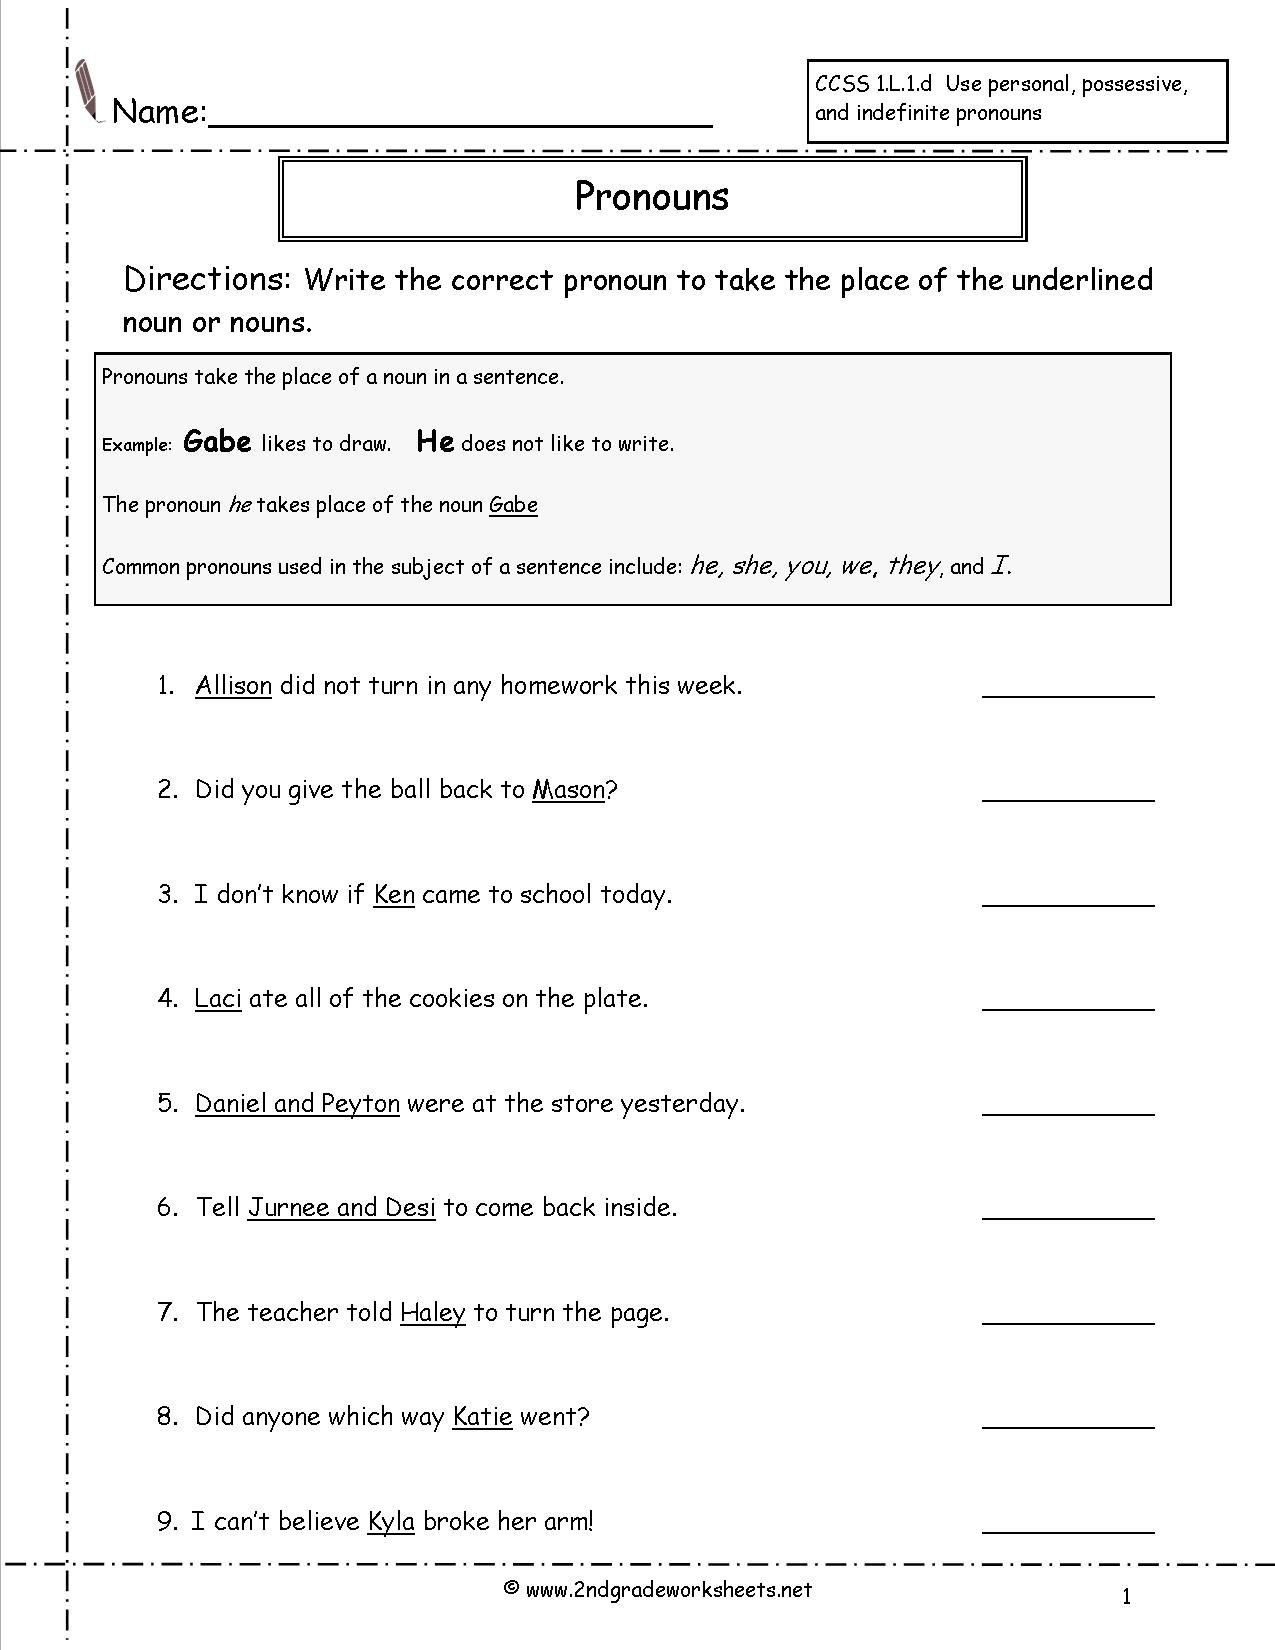 Nouns Worksheets And Printouts - Free Printable Pronoun Worksheets | Free Printable Pronoun Worksheets For 2Nd Grade